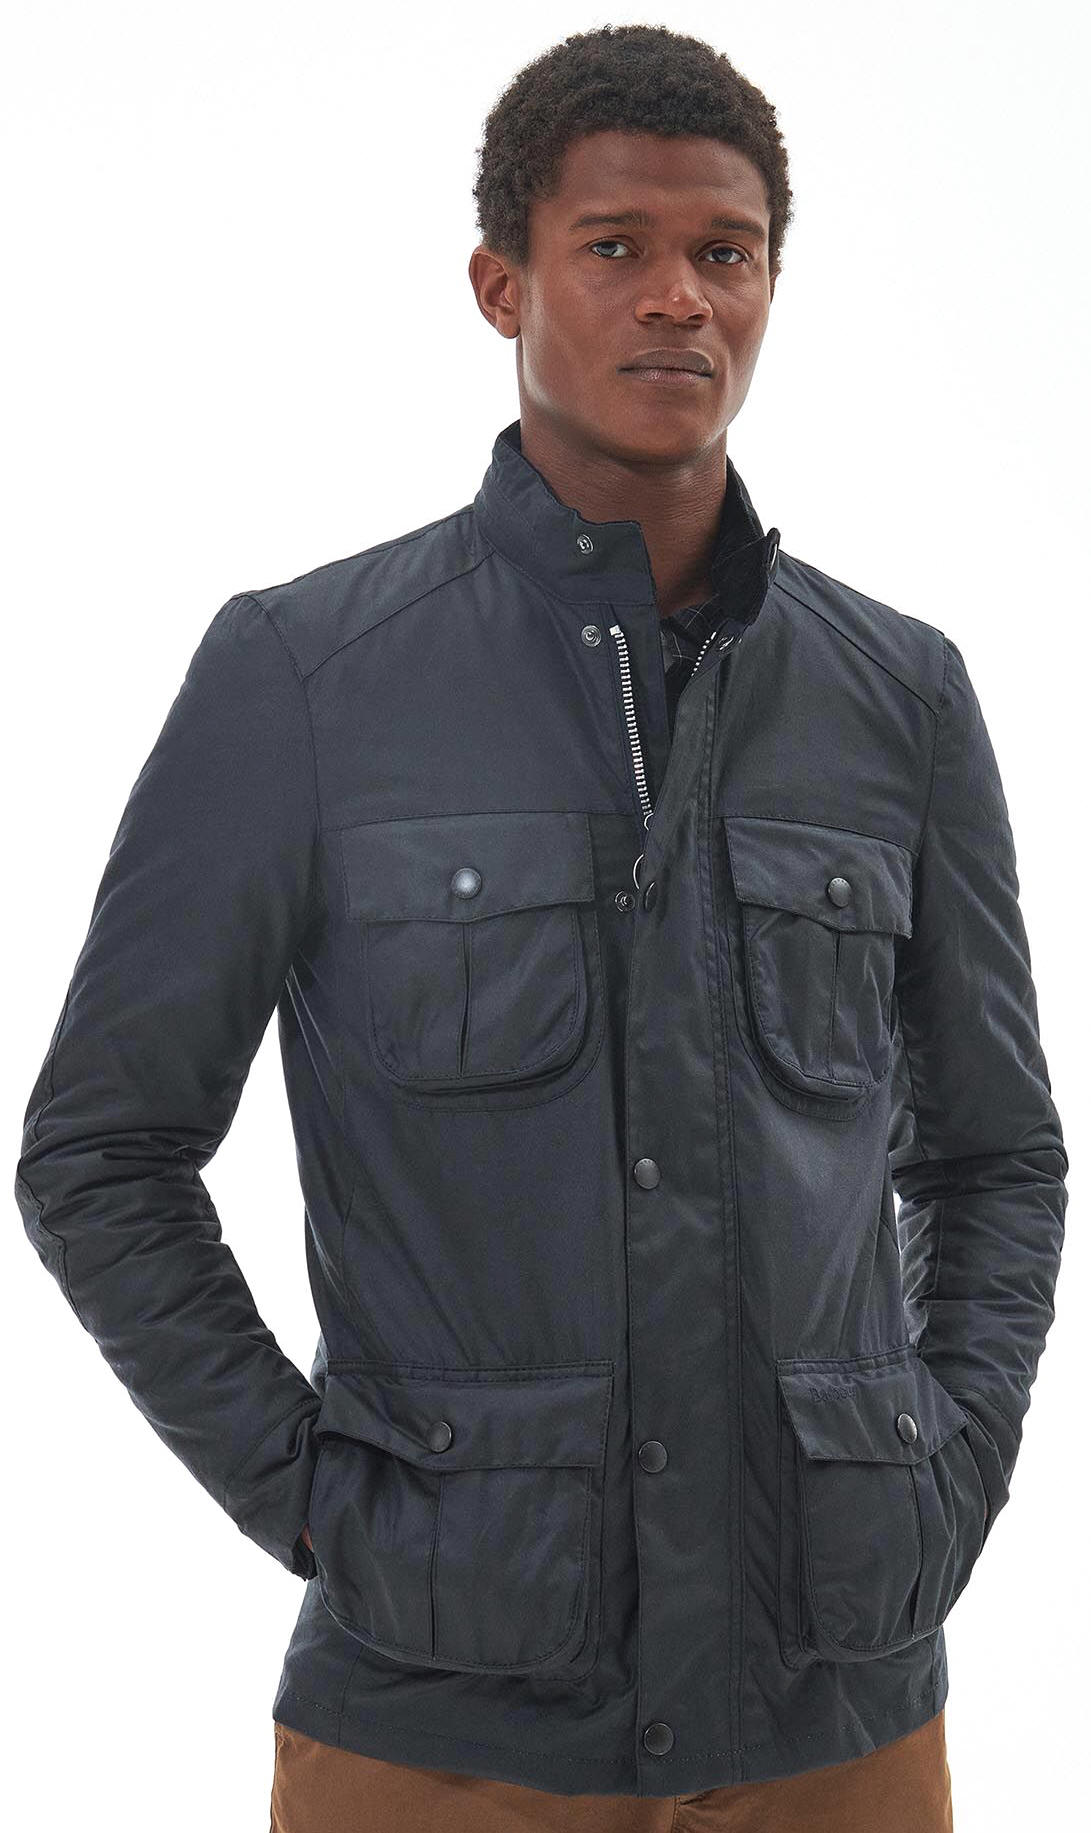 Barbour Corbridge Wax Navy Jacket - FREE GIFT | Red Rae Town & Country